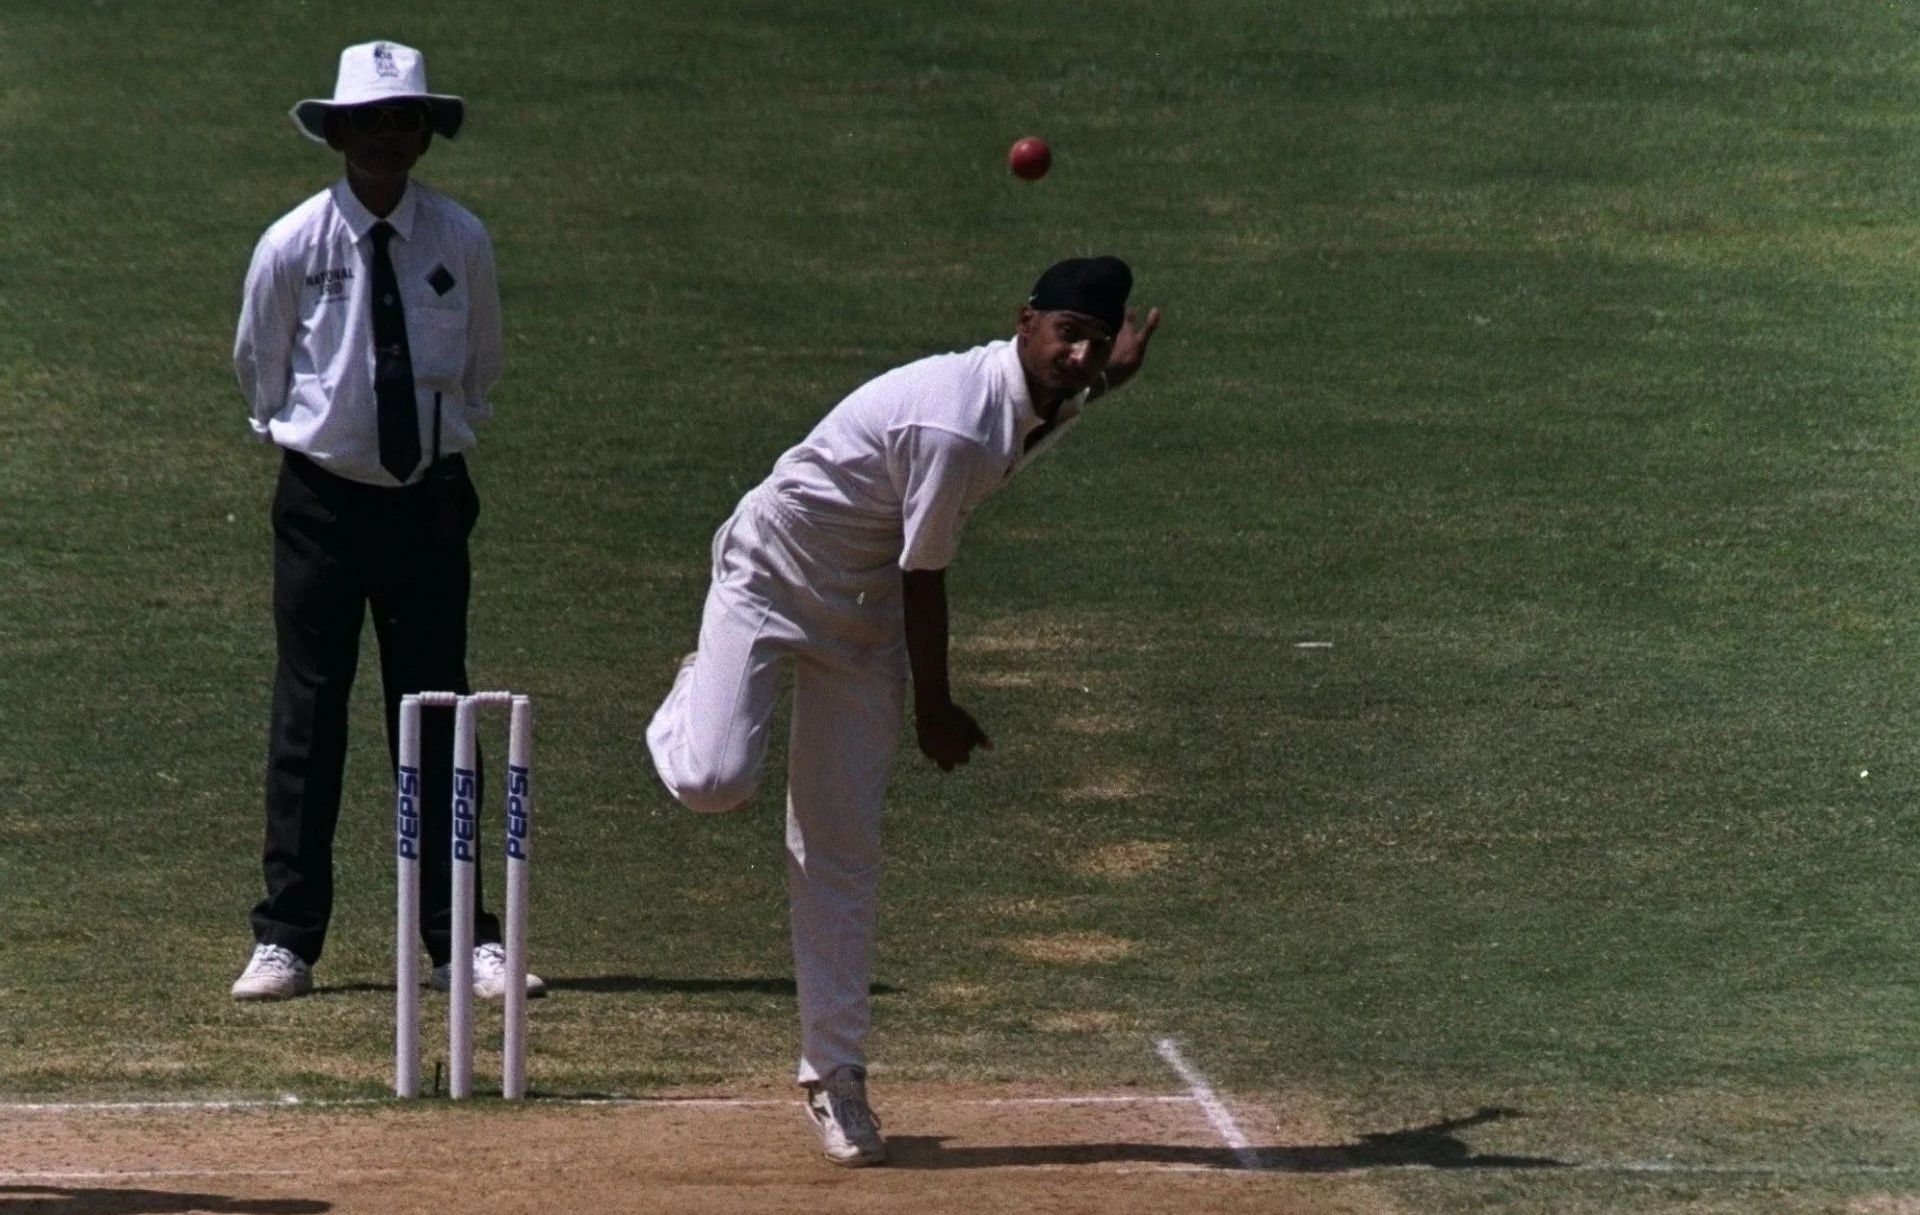 Harbhajan Singh bowling in his debut Test. Pic: Getty Images